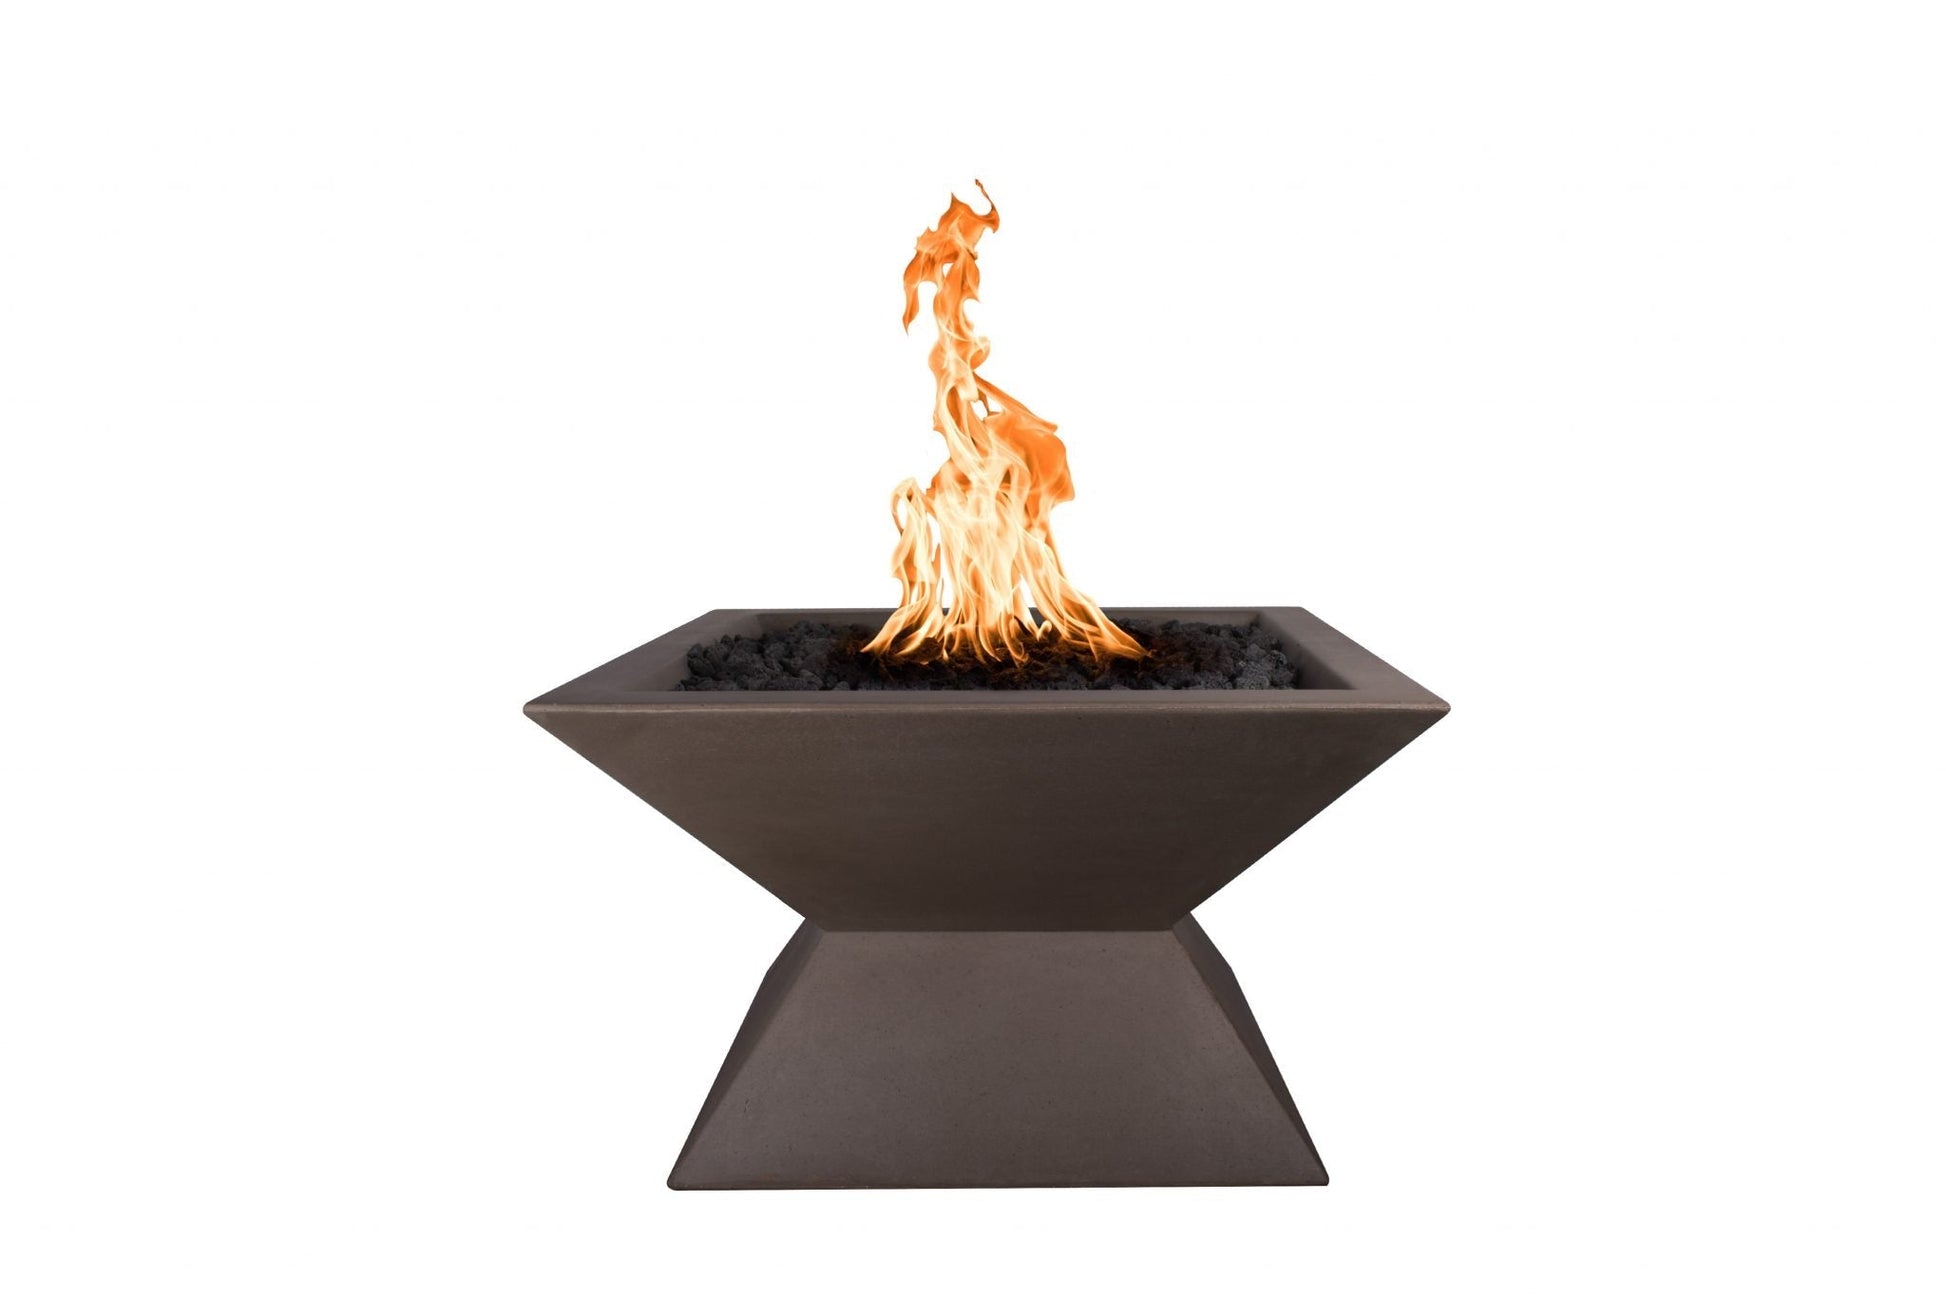 The Outdoor Plus Square Uxmal 30" Chocolate GFRC Concrete Liquid Propane Fire Pit with Match Lit Ignition